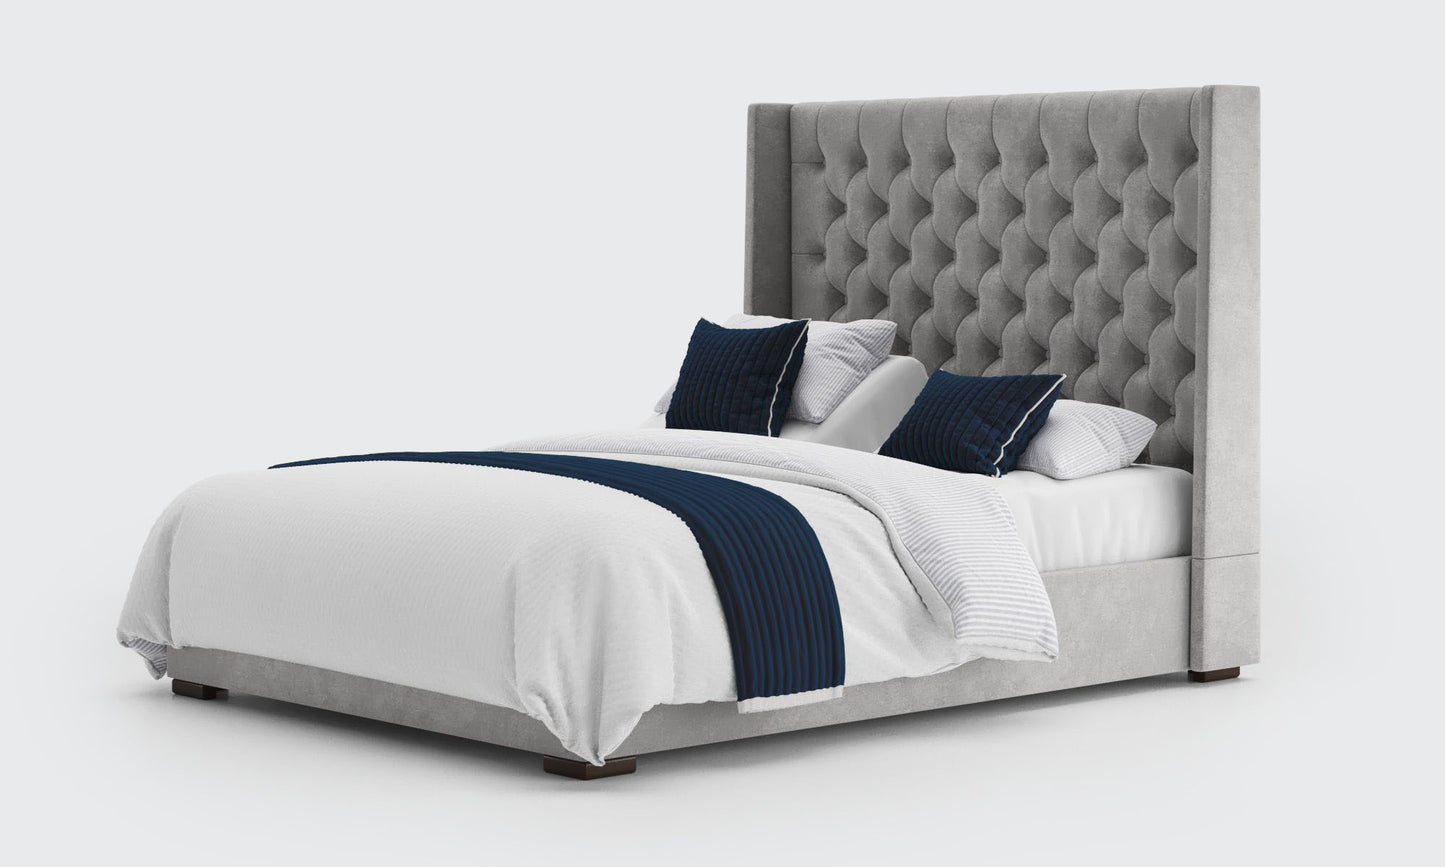 kensington 5ft king dual bed and mattress in the Silver velvet material